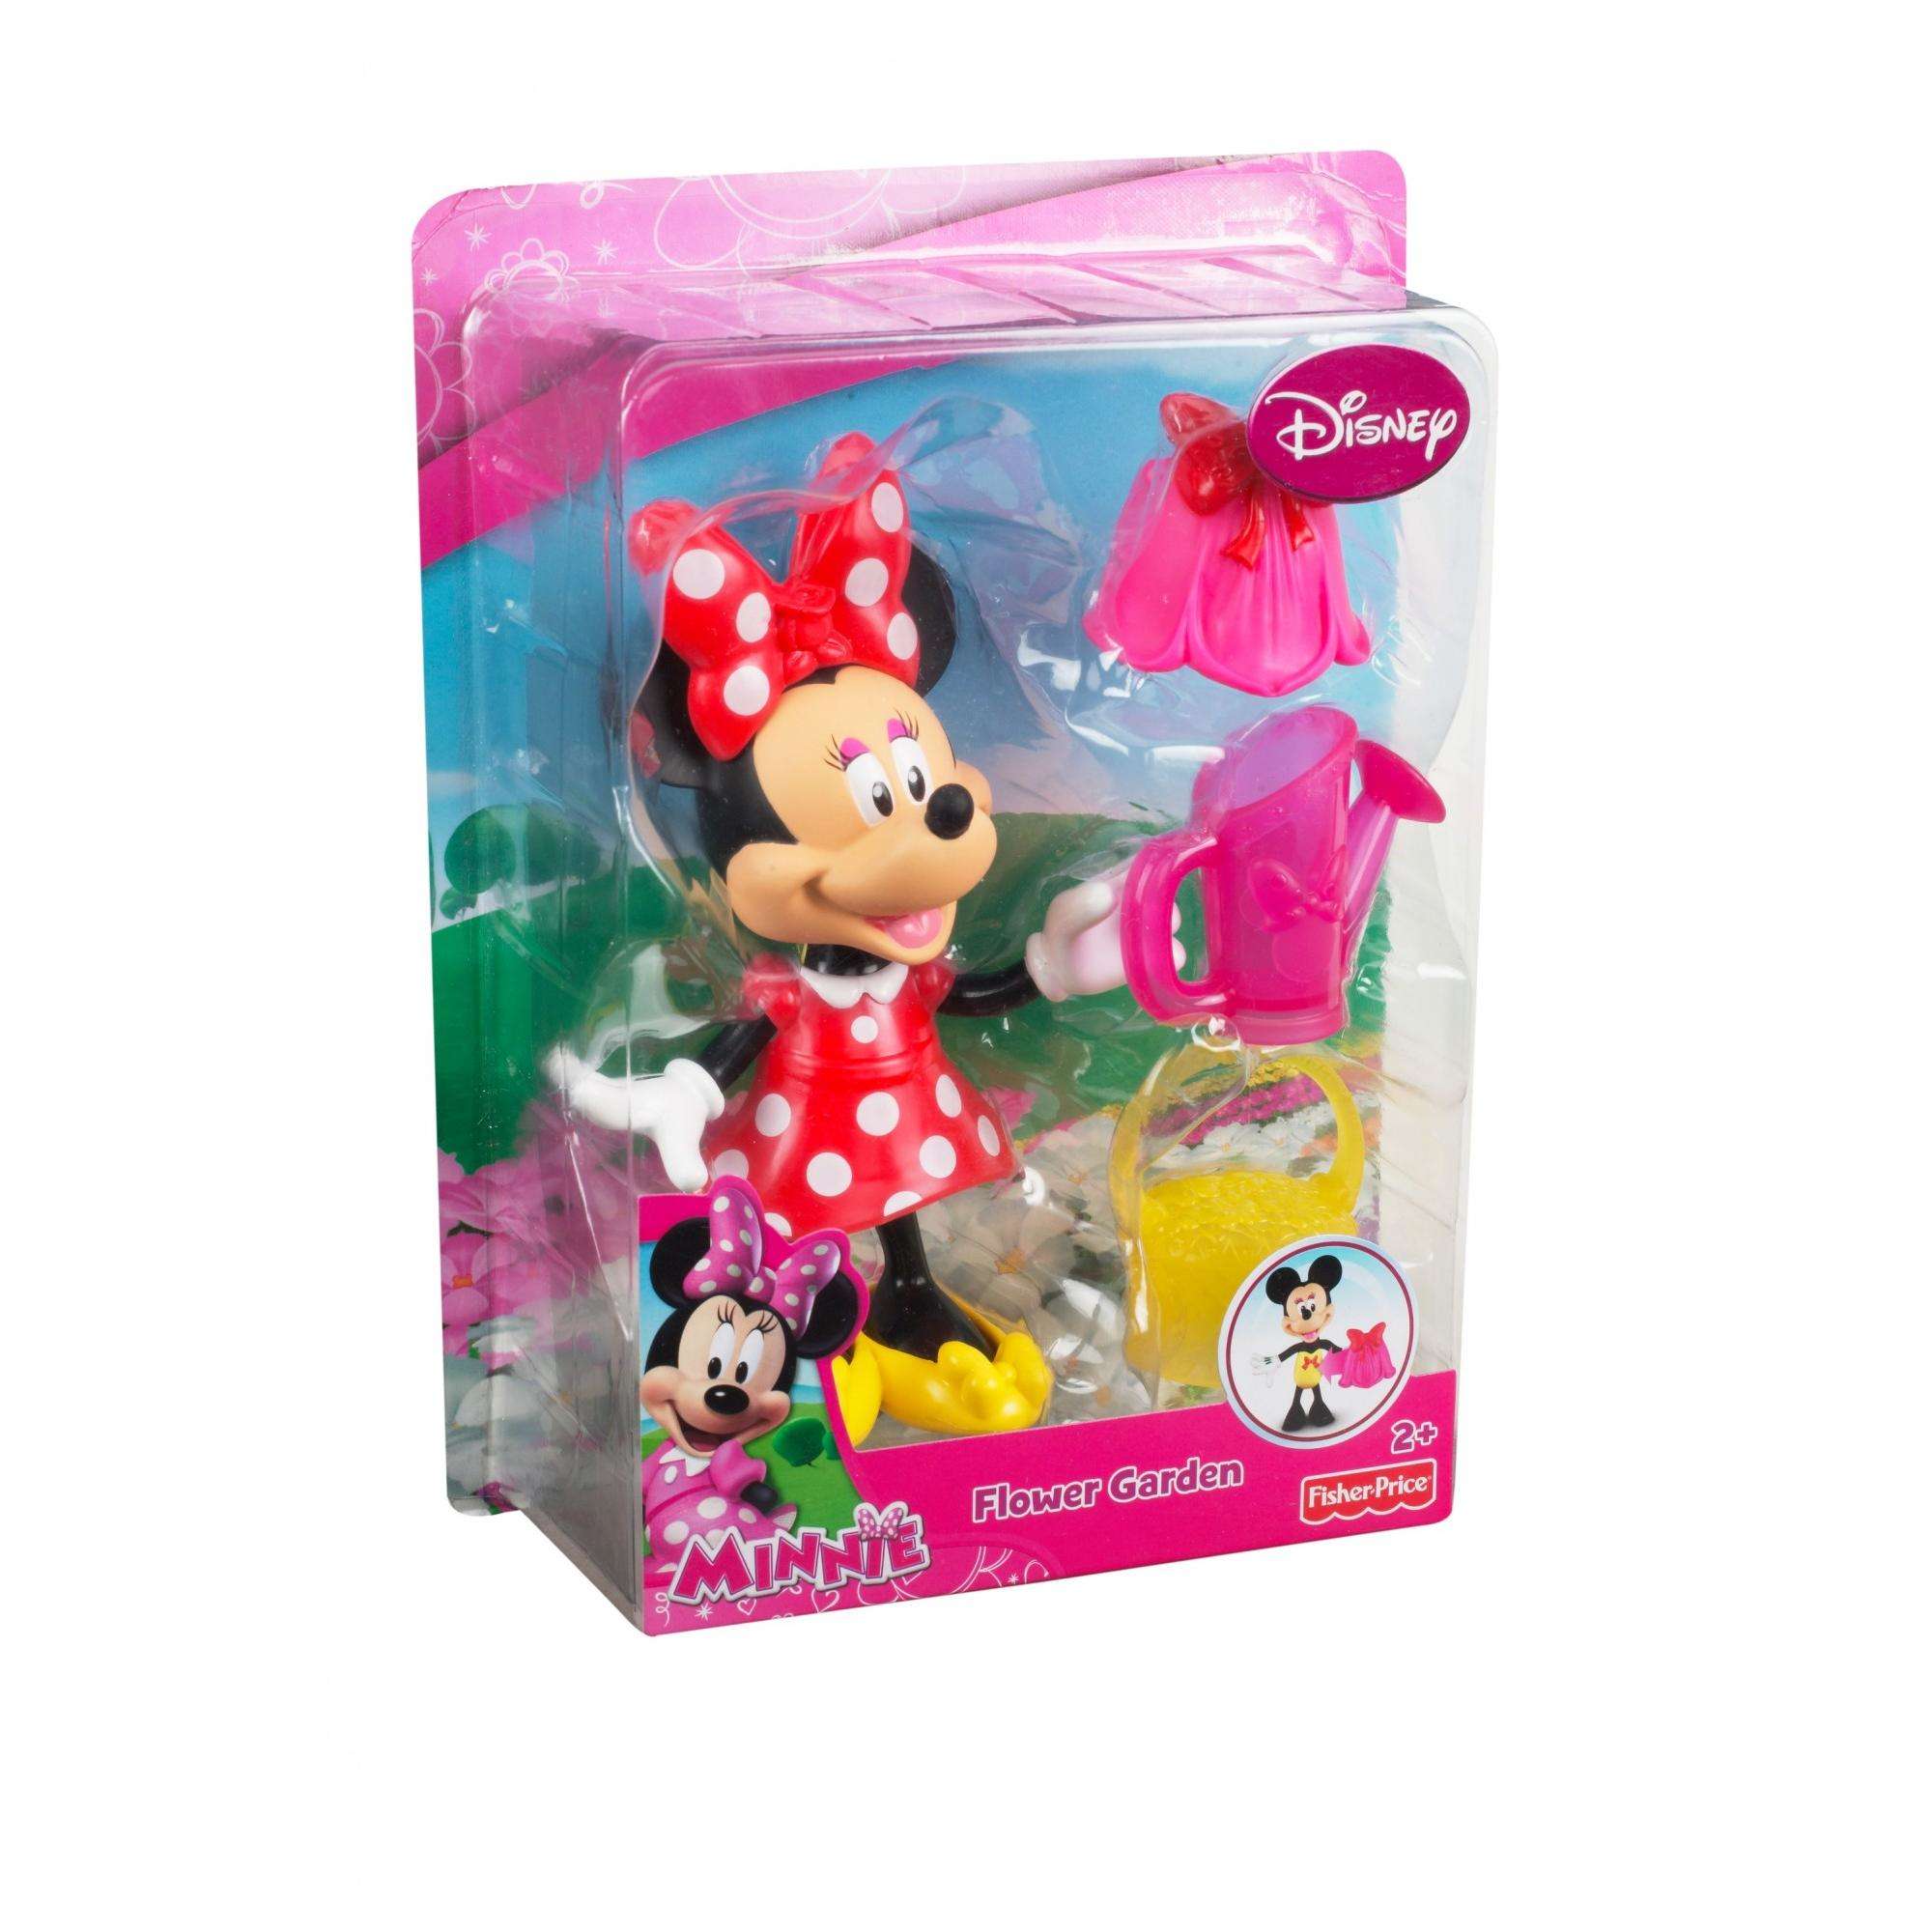 Fisher-Price Disney Minnie Mouse Flower Garden Bow-Tique Playset - image 4 of 4